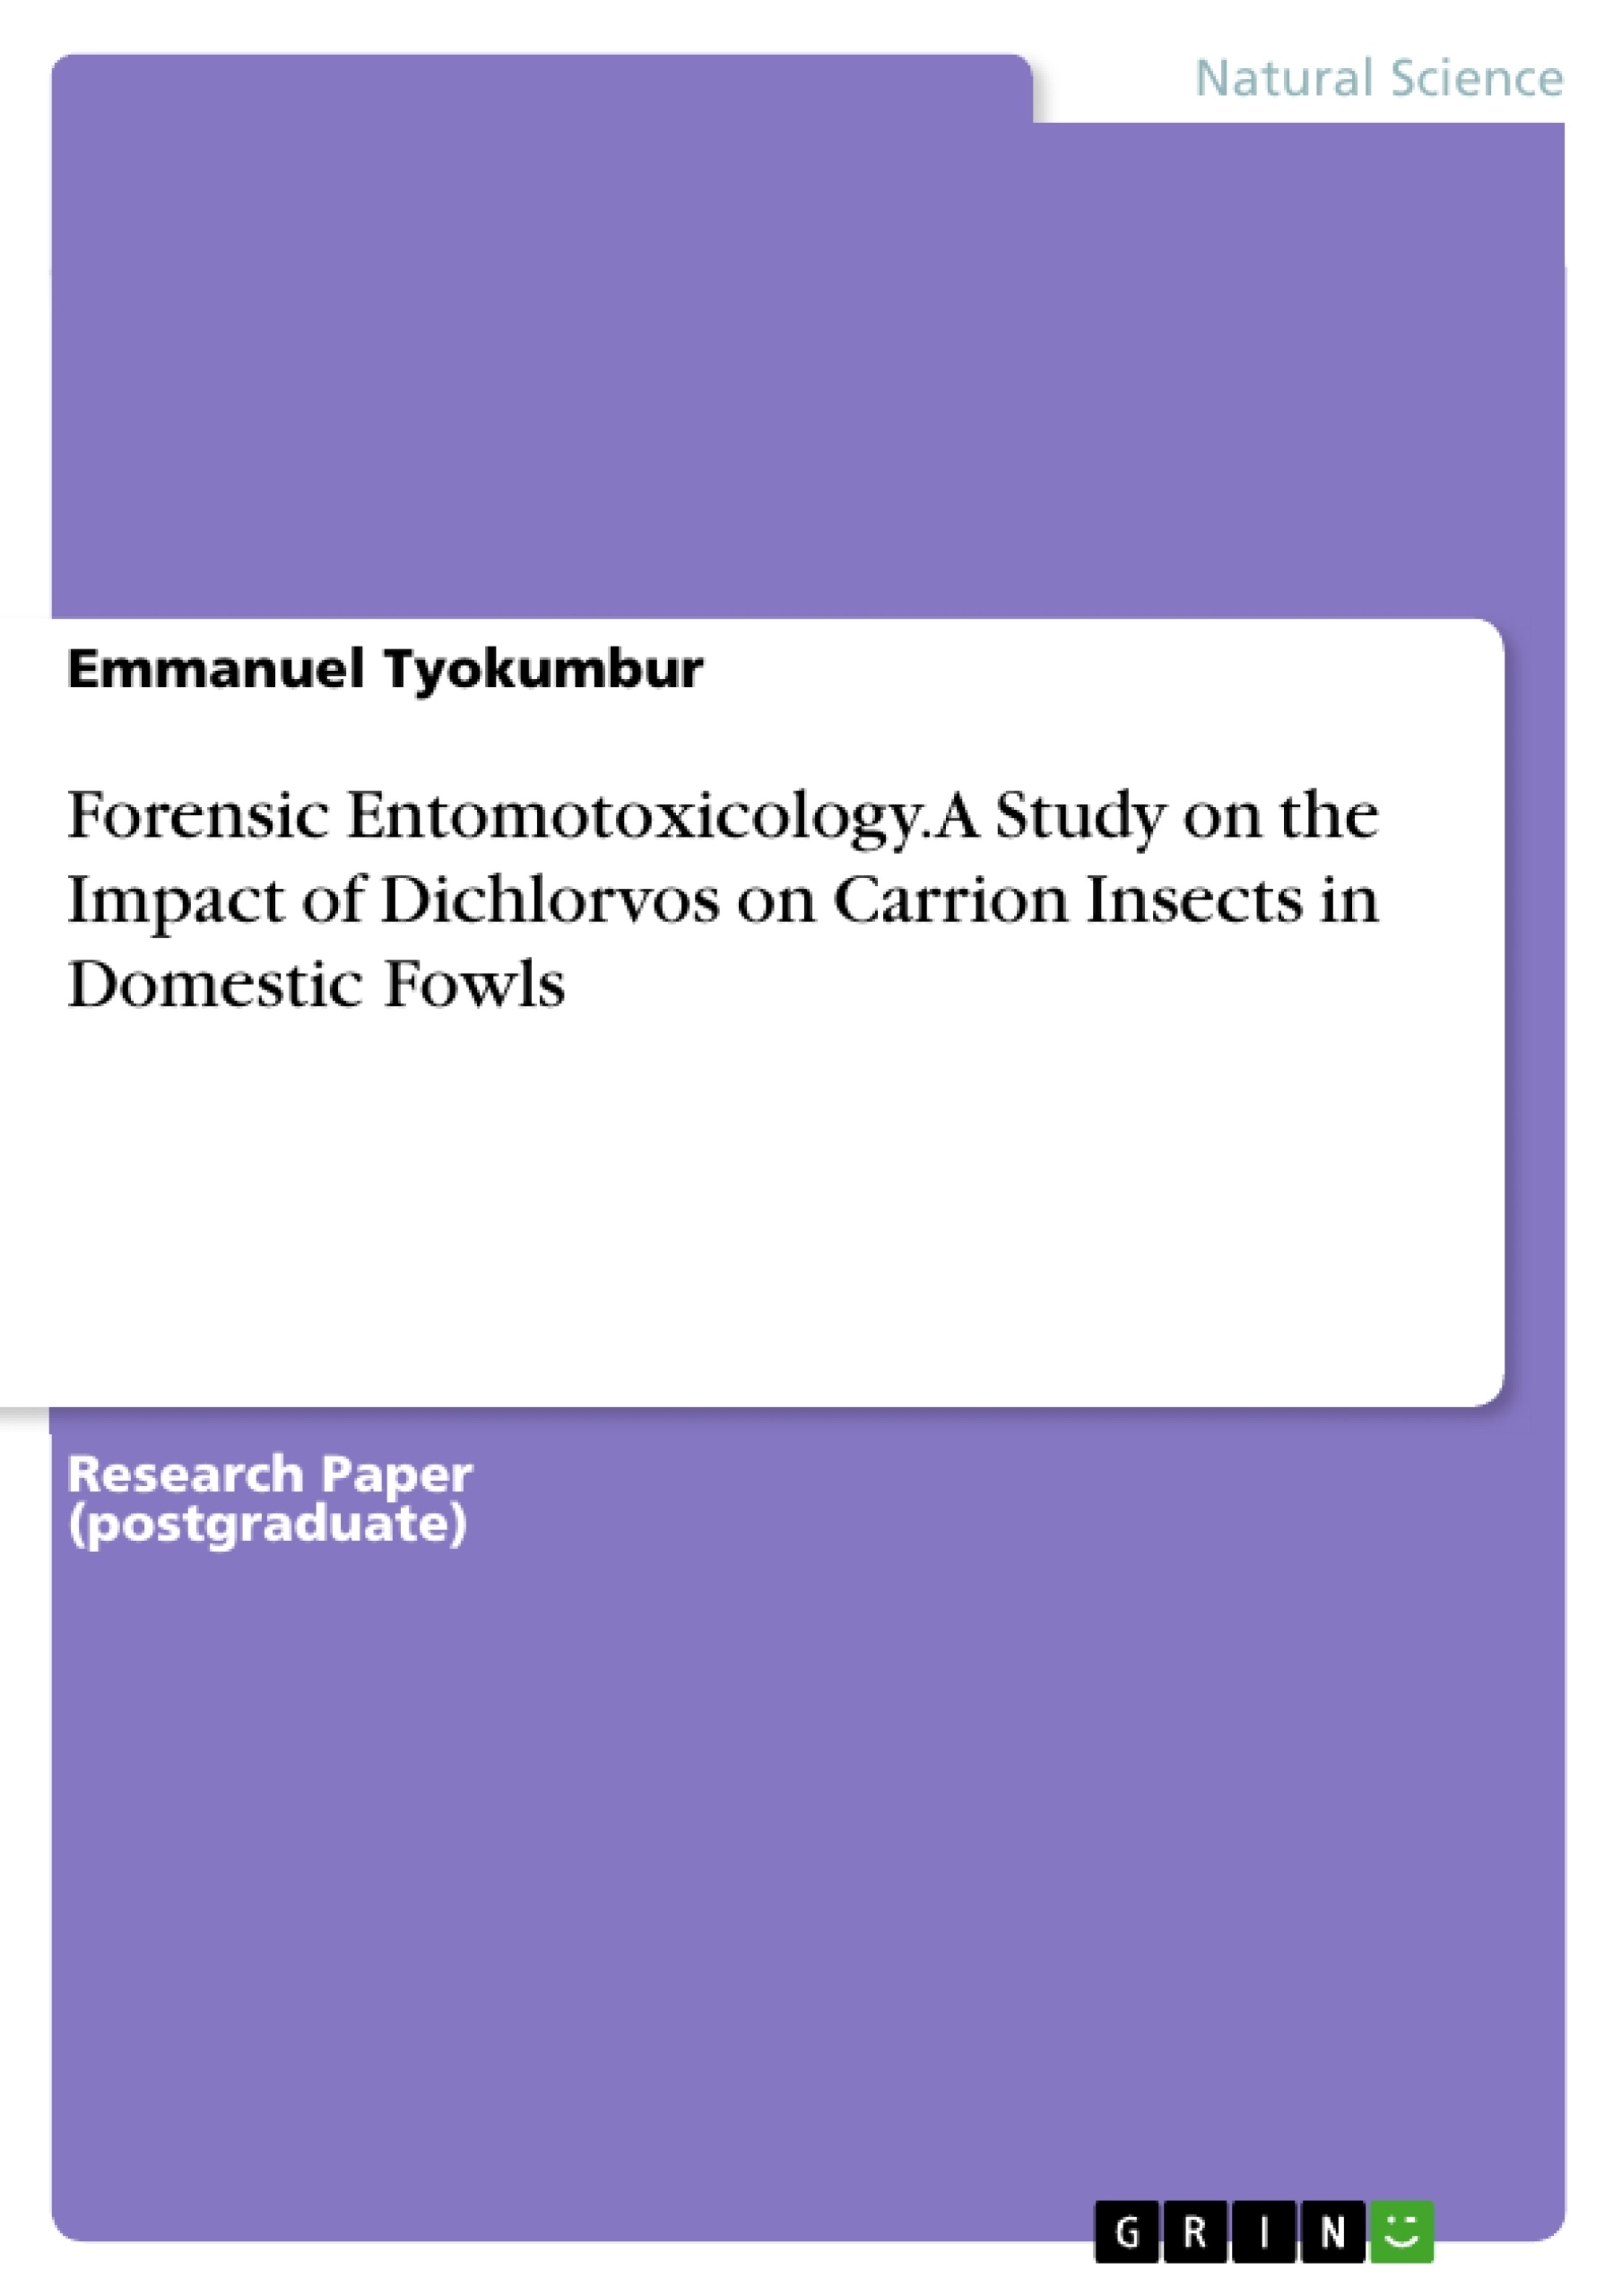 Title: Forensic Entomotoxicology. A Study on the Impact of Dichlorvos on Carrion Insects in Domestic Fowls